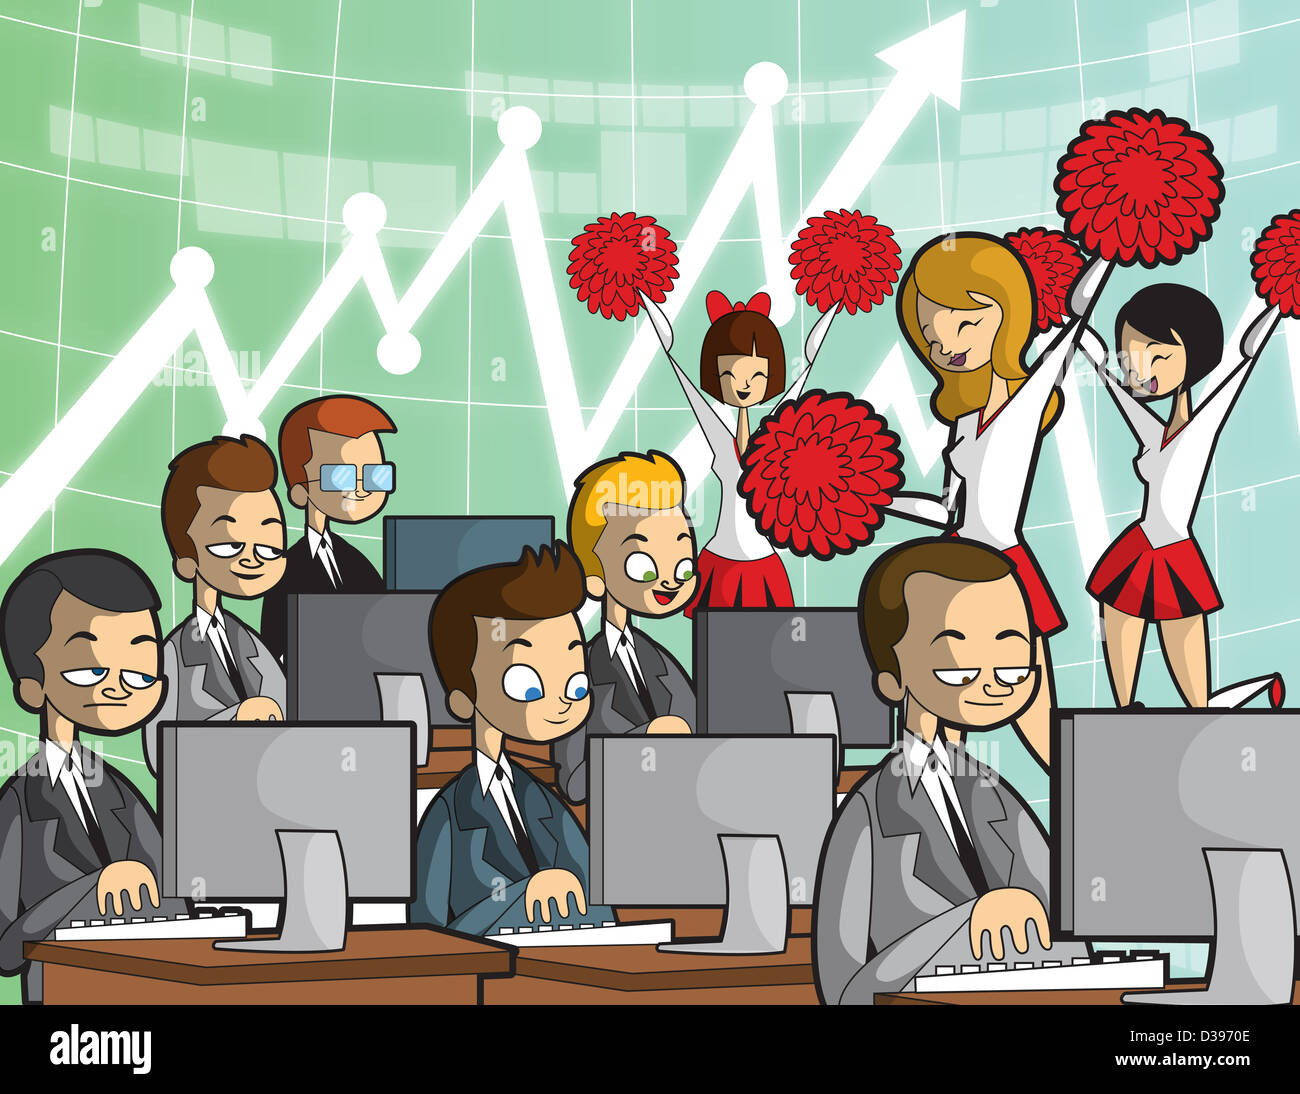 Illustrative image of business people competing for incentive with cheerleading team Stock Photo